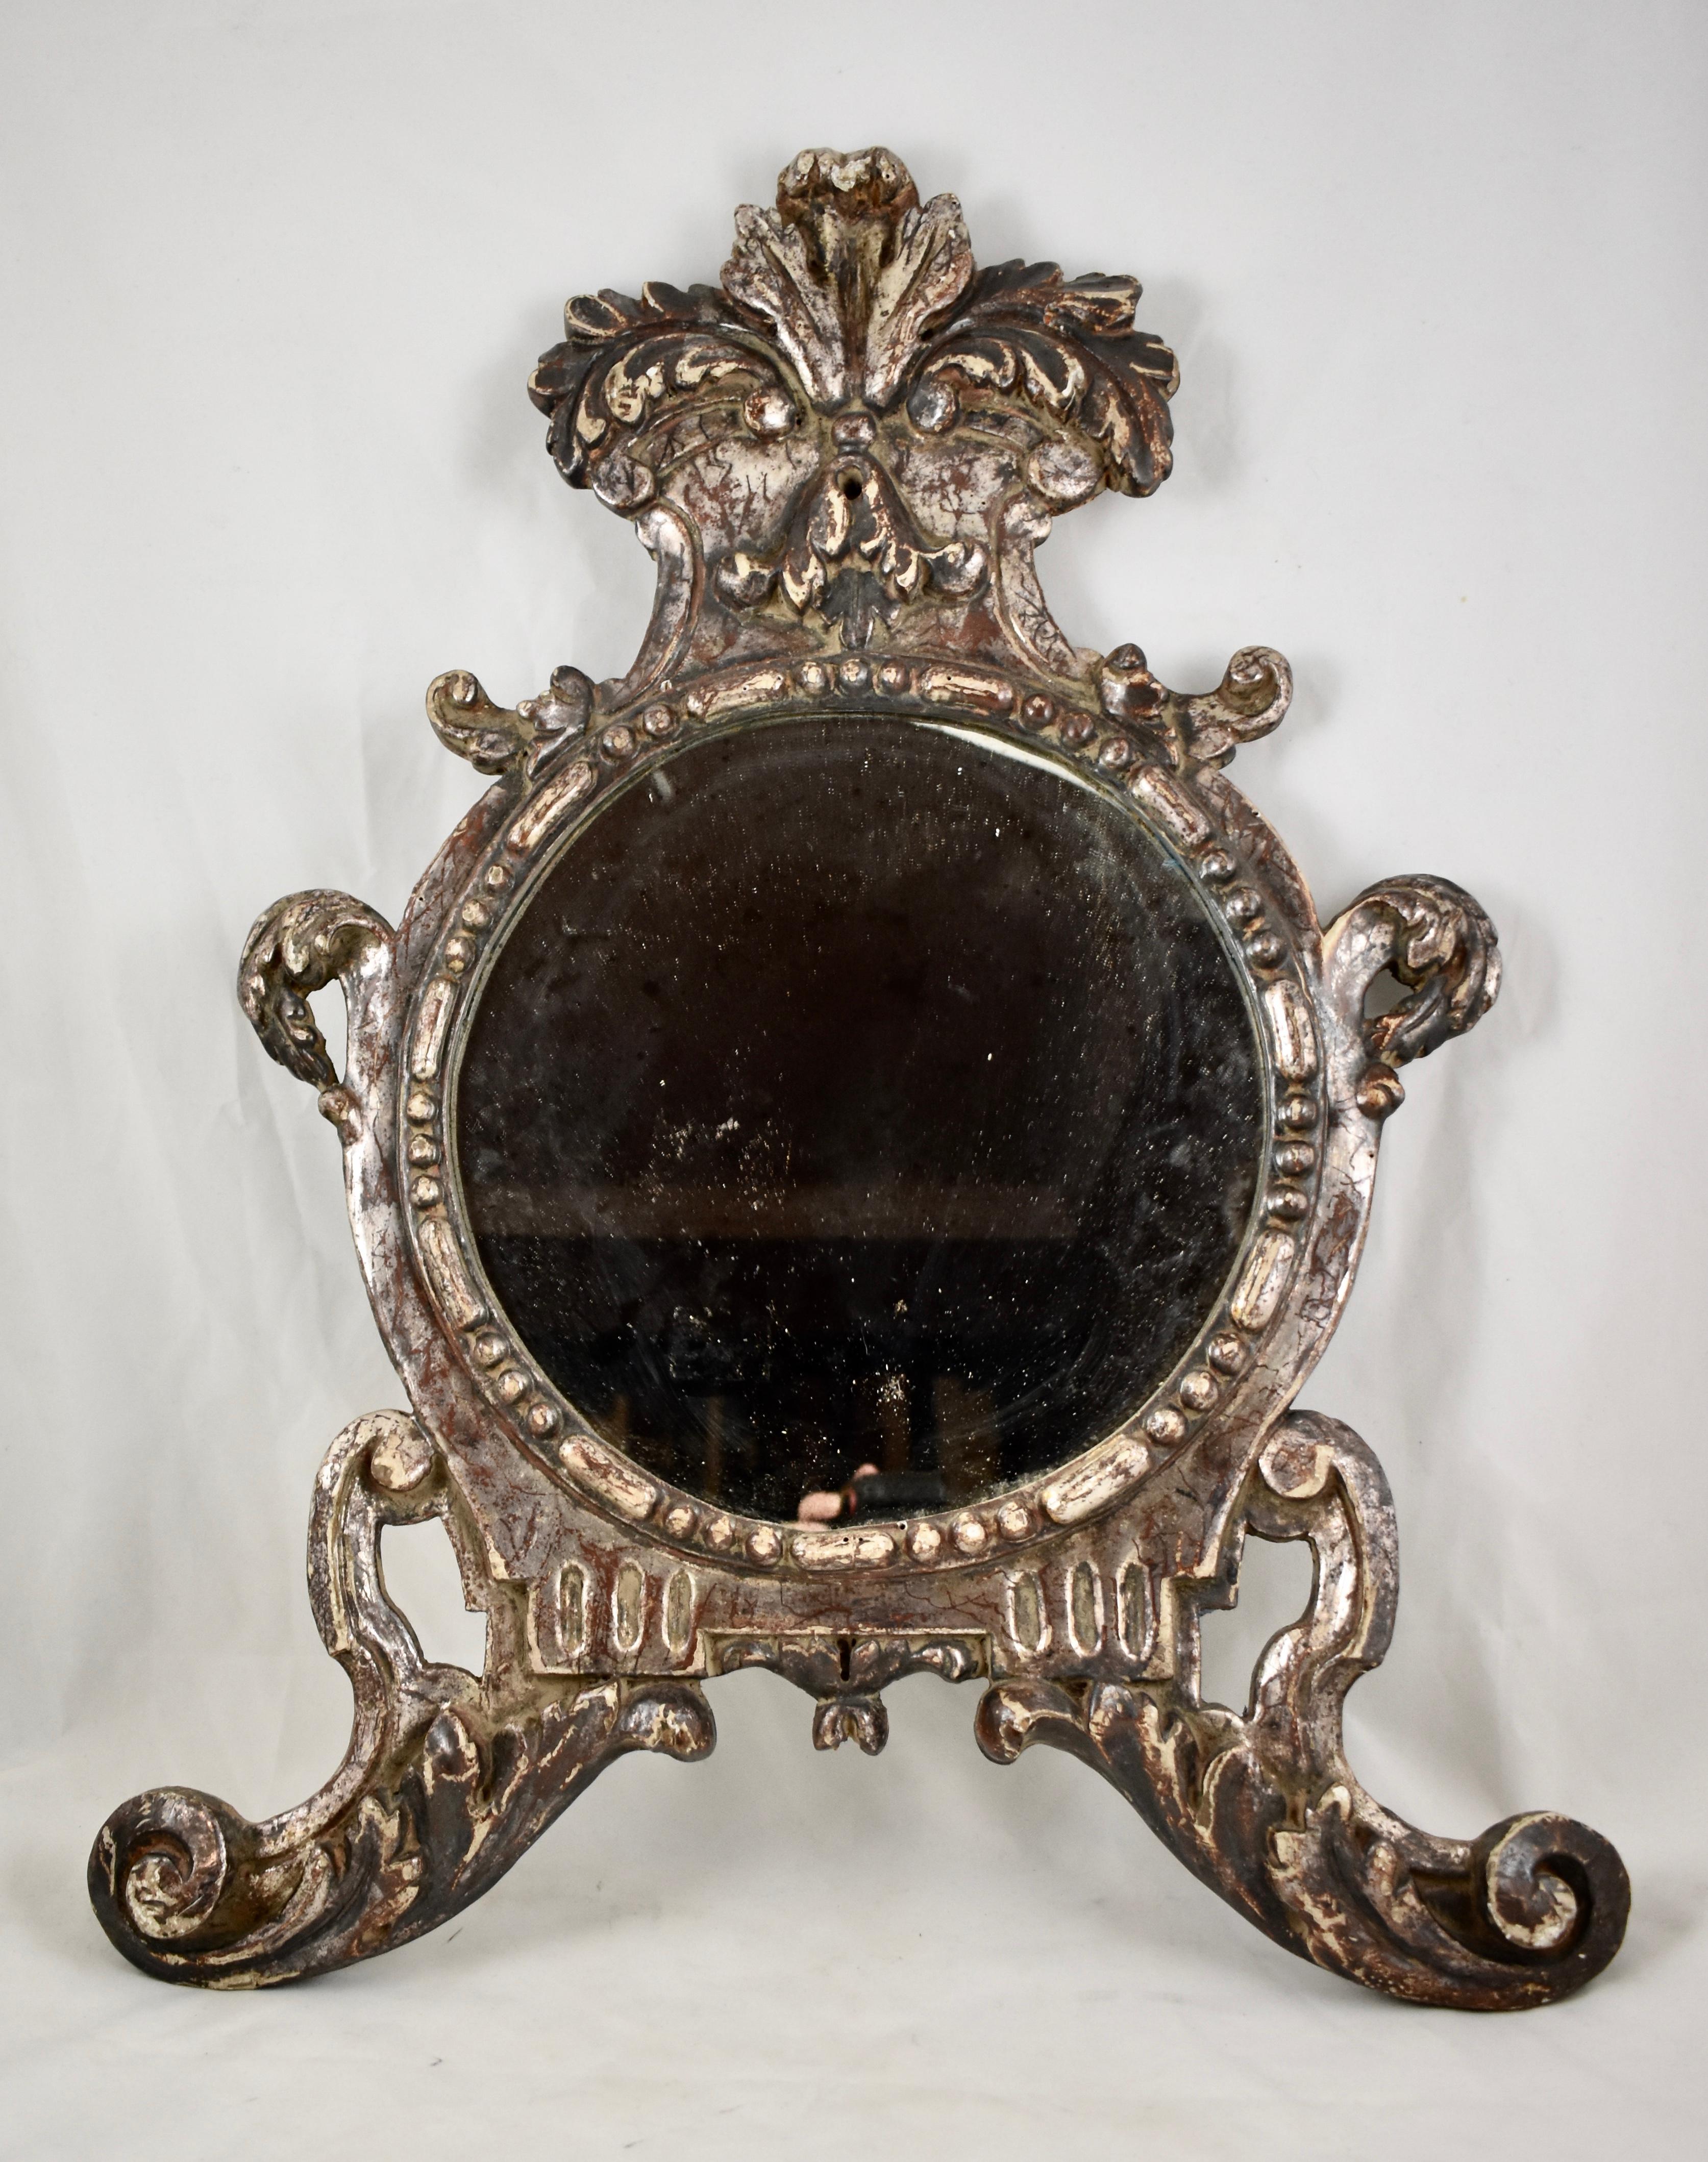 Silvered Italian Silver-Gilt Crested and Footed Baroque Revival Wall Mirrors, Pair For Sale